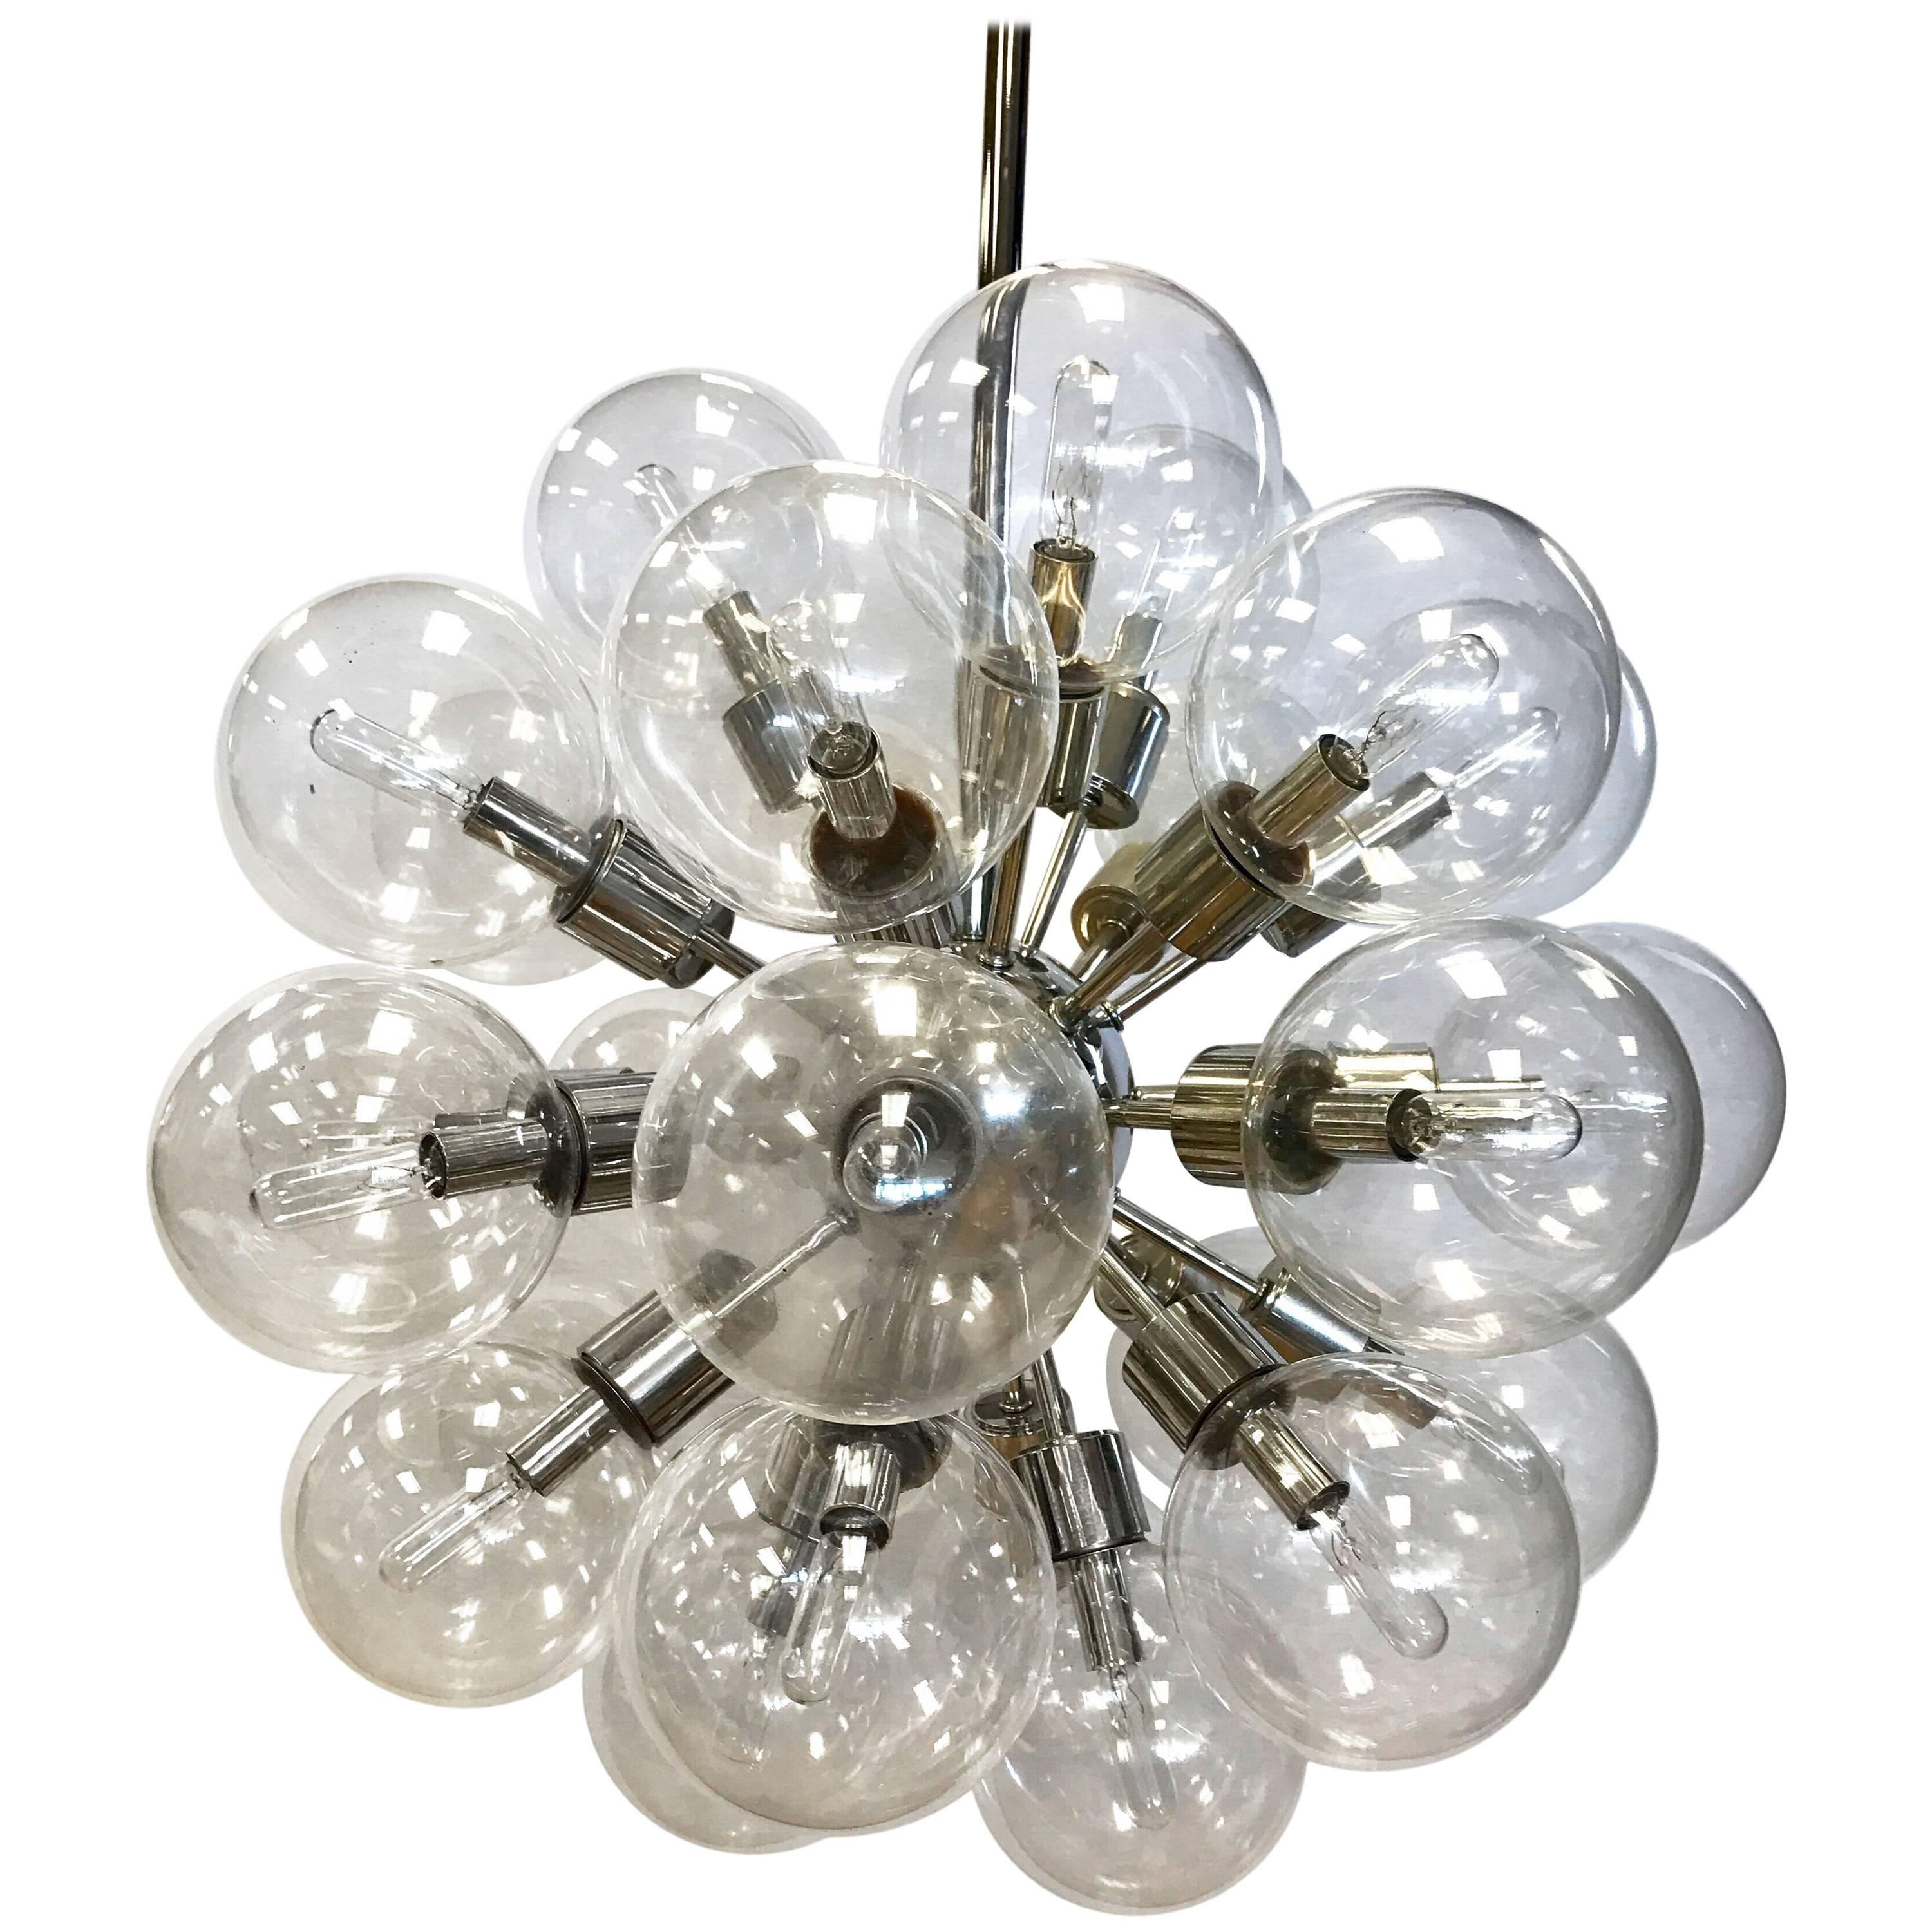 Rare, matching set of eight coveted Mid-Century Modern Lightolier 30 light Sputnik chandeliers, circa 1960s. Features 30 original glass globes on polished chrome spokes radiating from a central chrome nucleus. They are made of polished chrome and